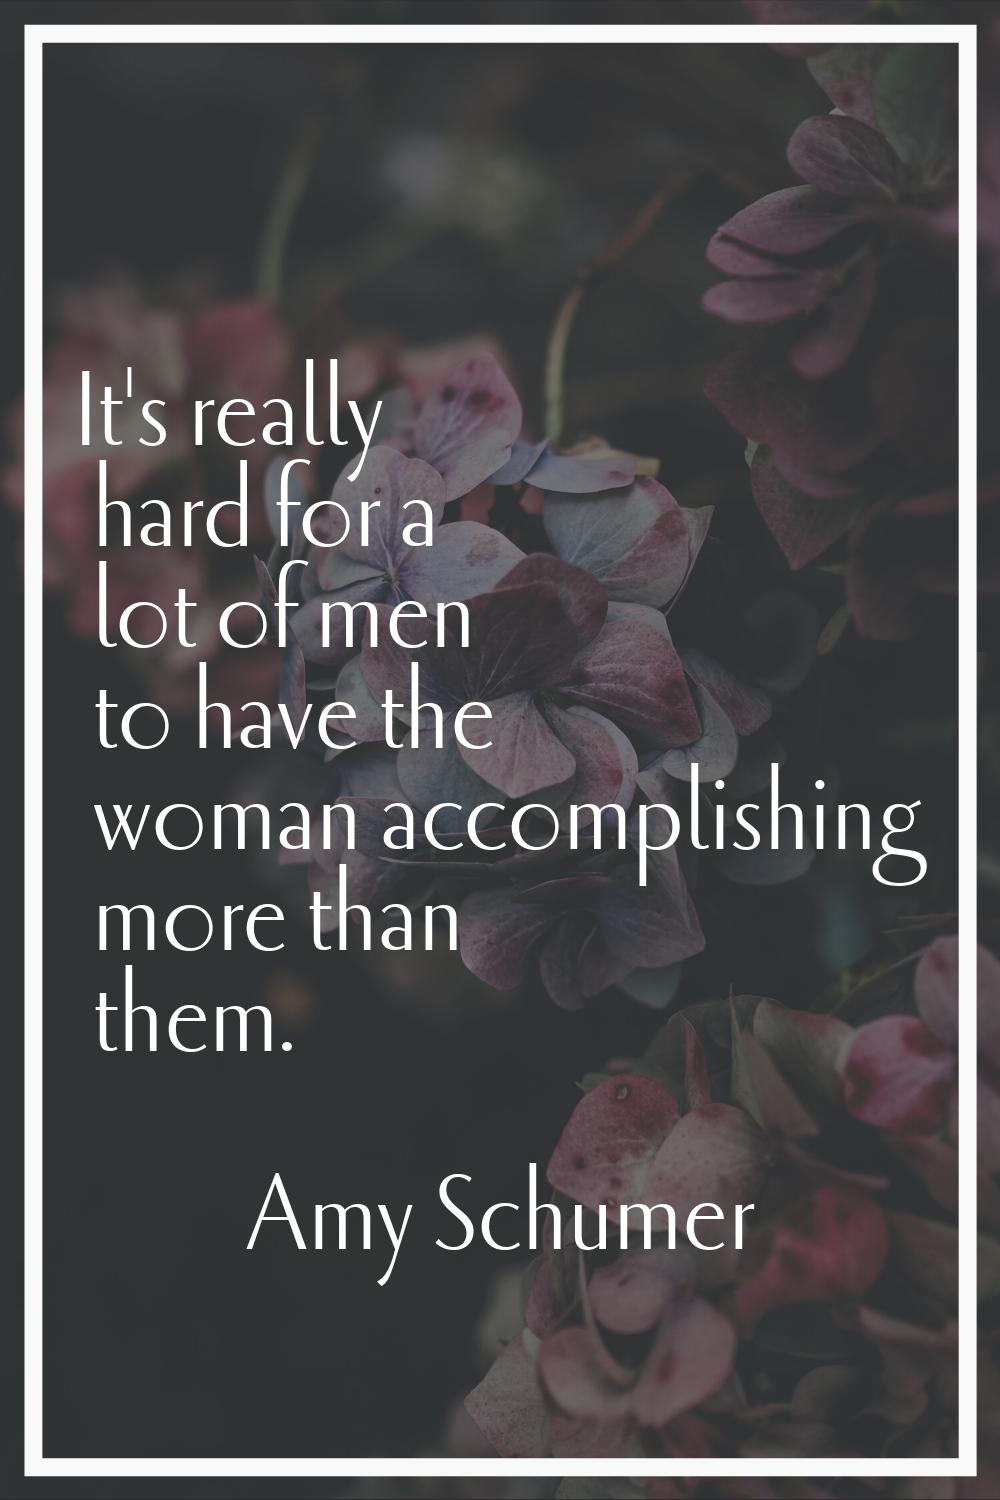 It's really hard for a lot of men to have the woman accomplishing more than them.